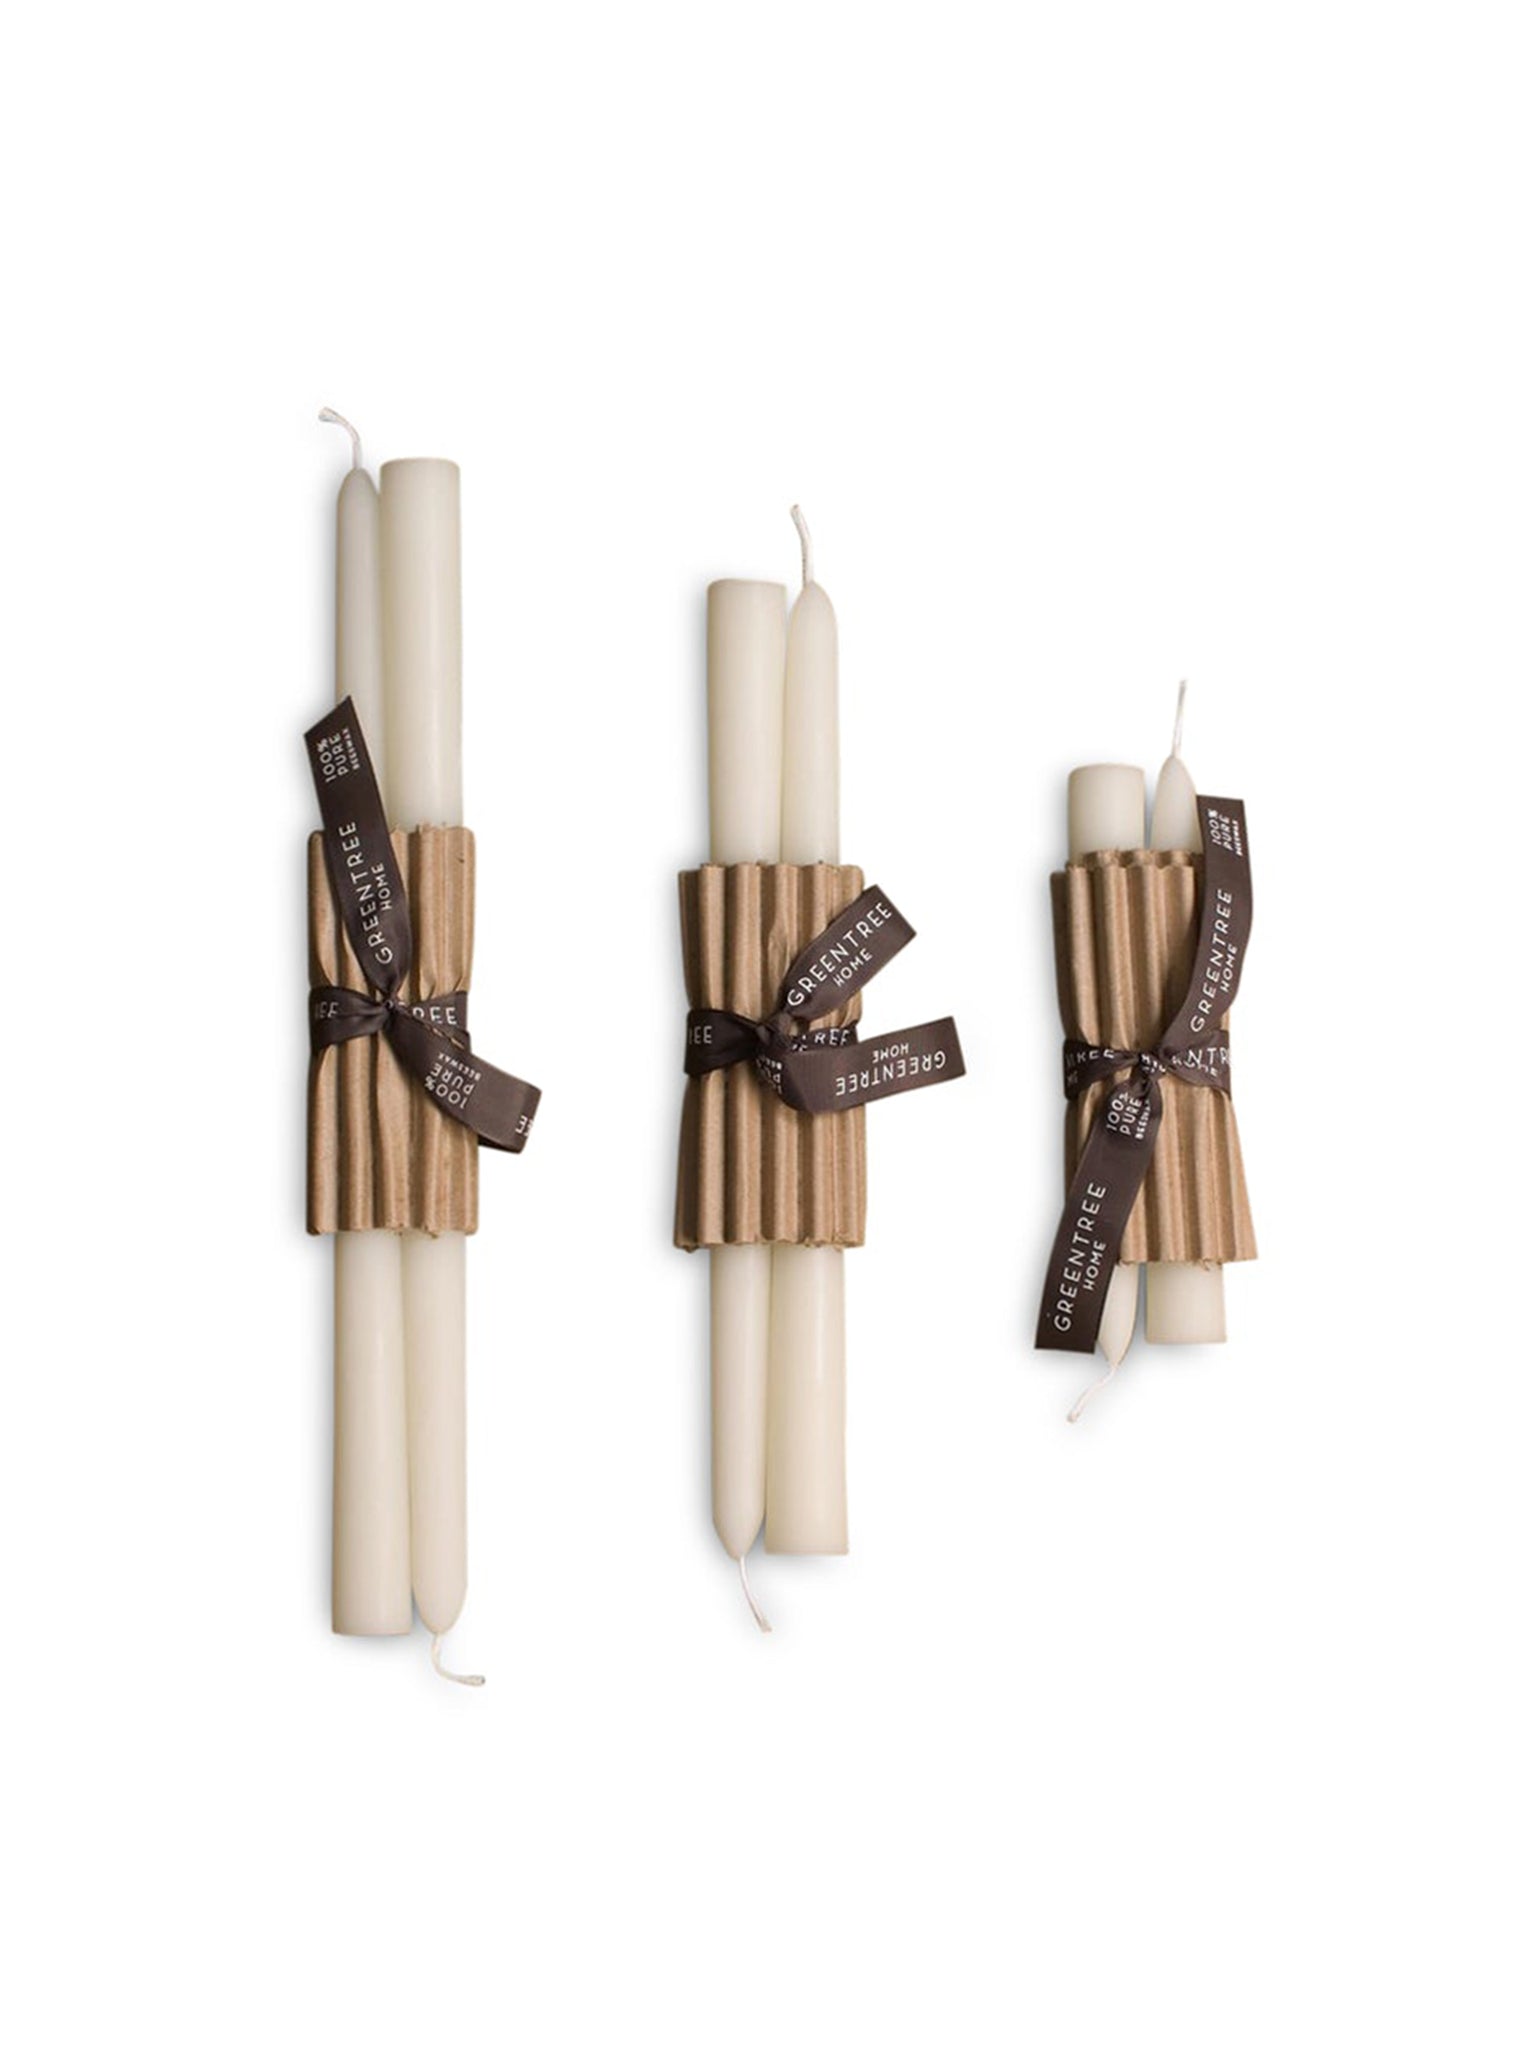 Greentree Home Candle Everyday Tapers Cream Weston Table